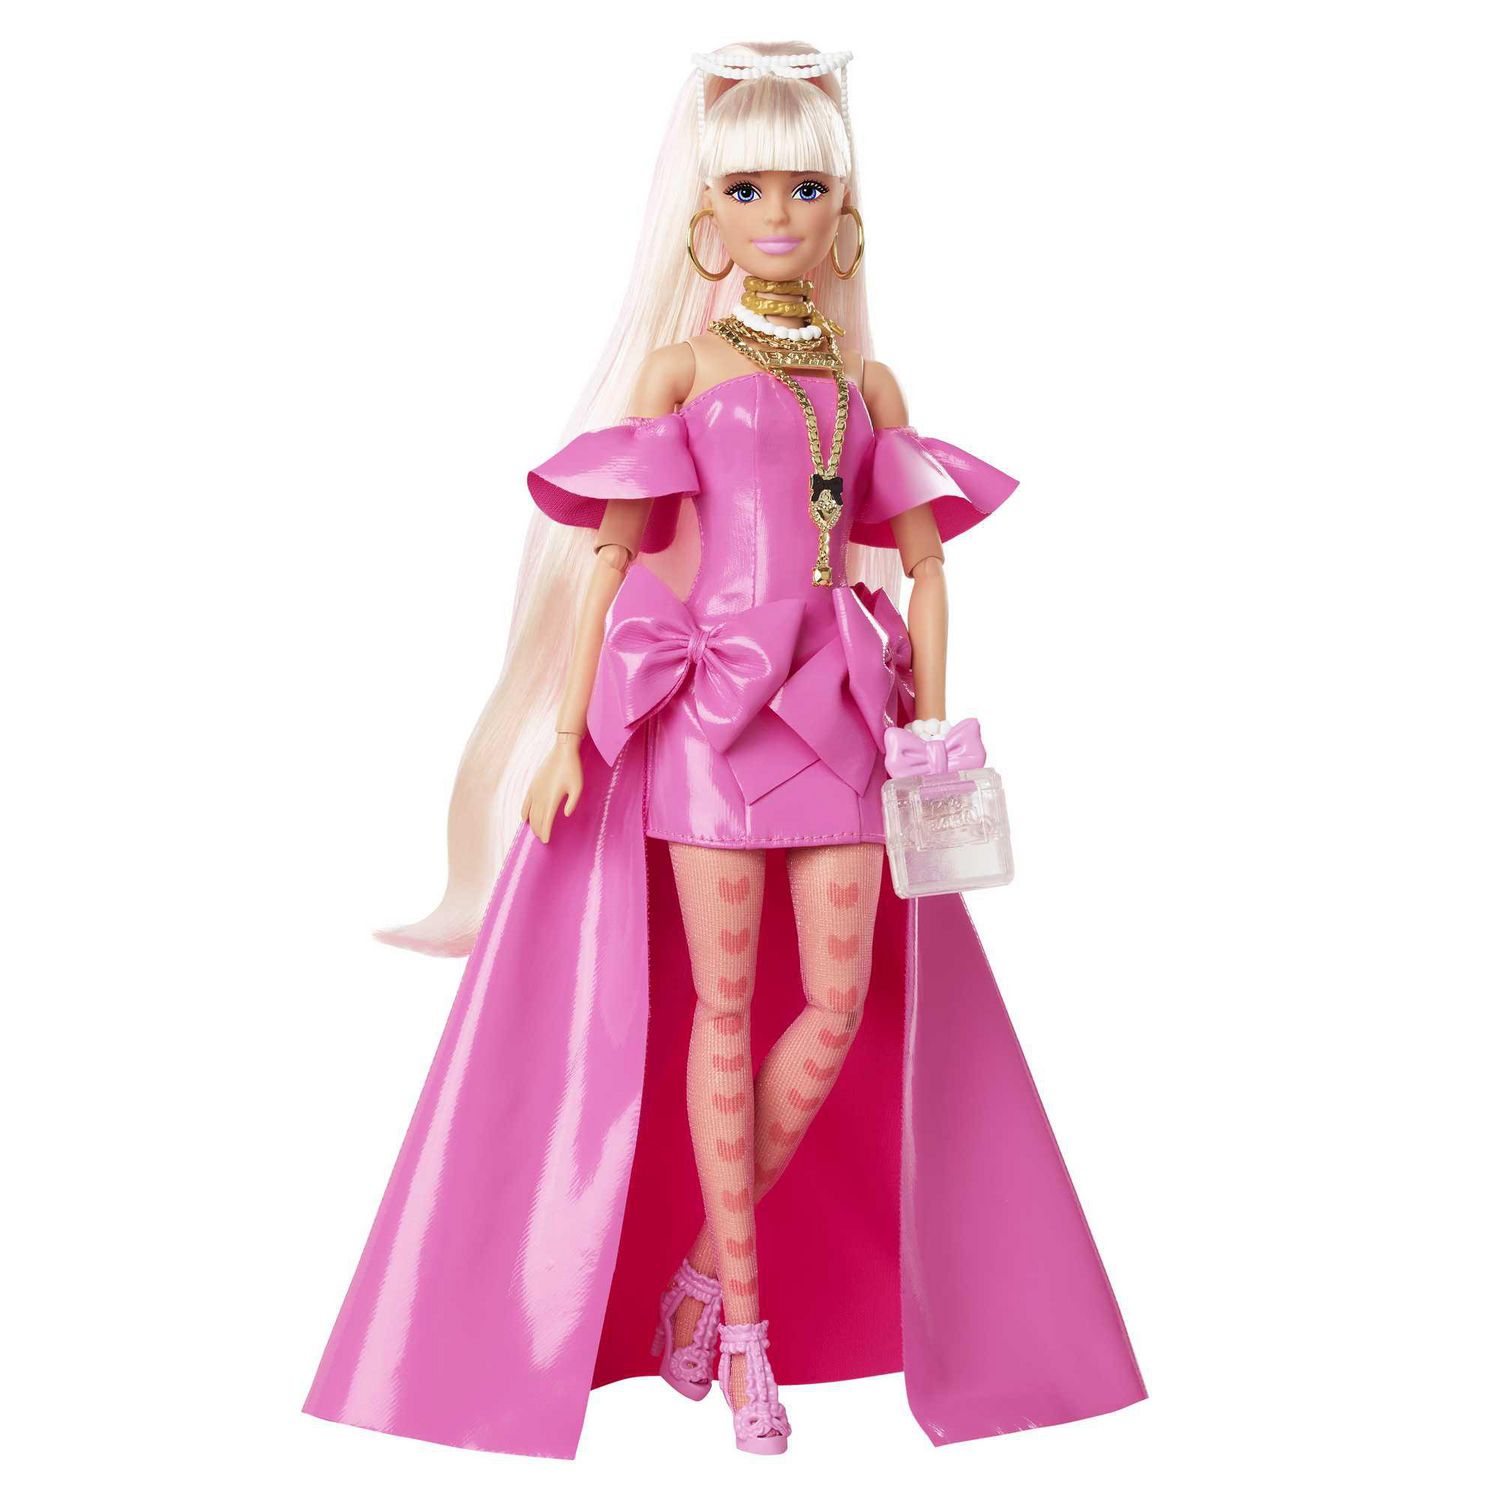  Barbie Professional Doctor Fashion Doll with Pink Top & Purple  Pants, White Shoes & Stethoscope Accessory : Toys & Games